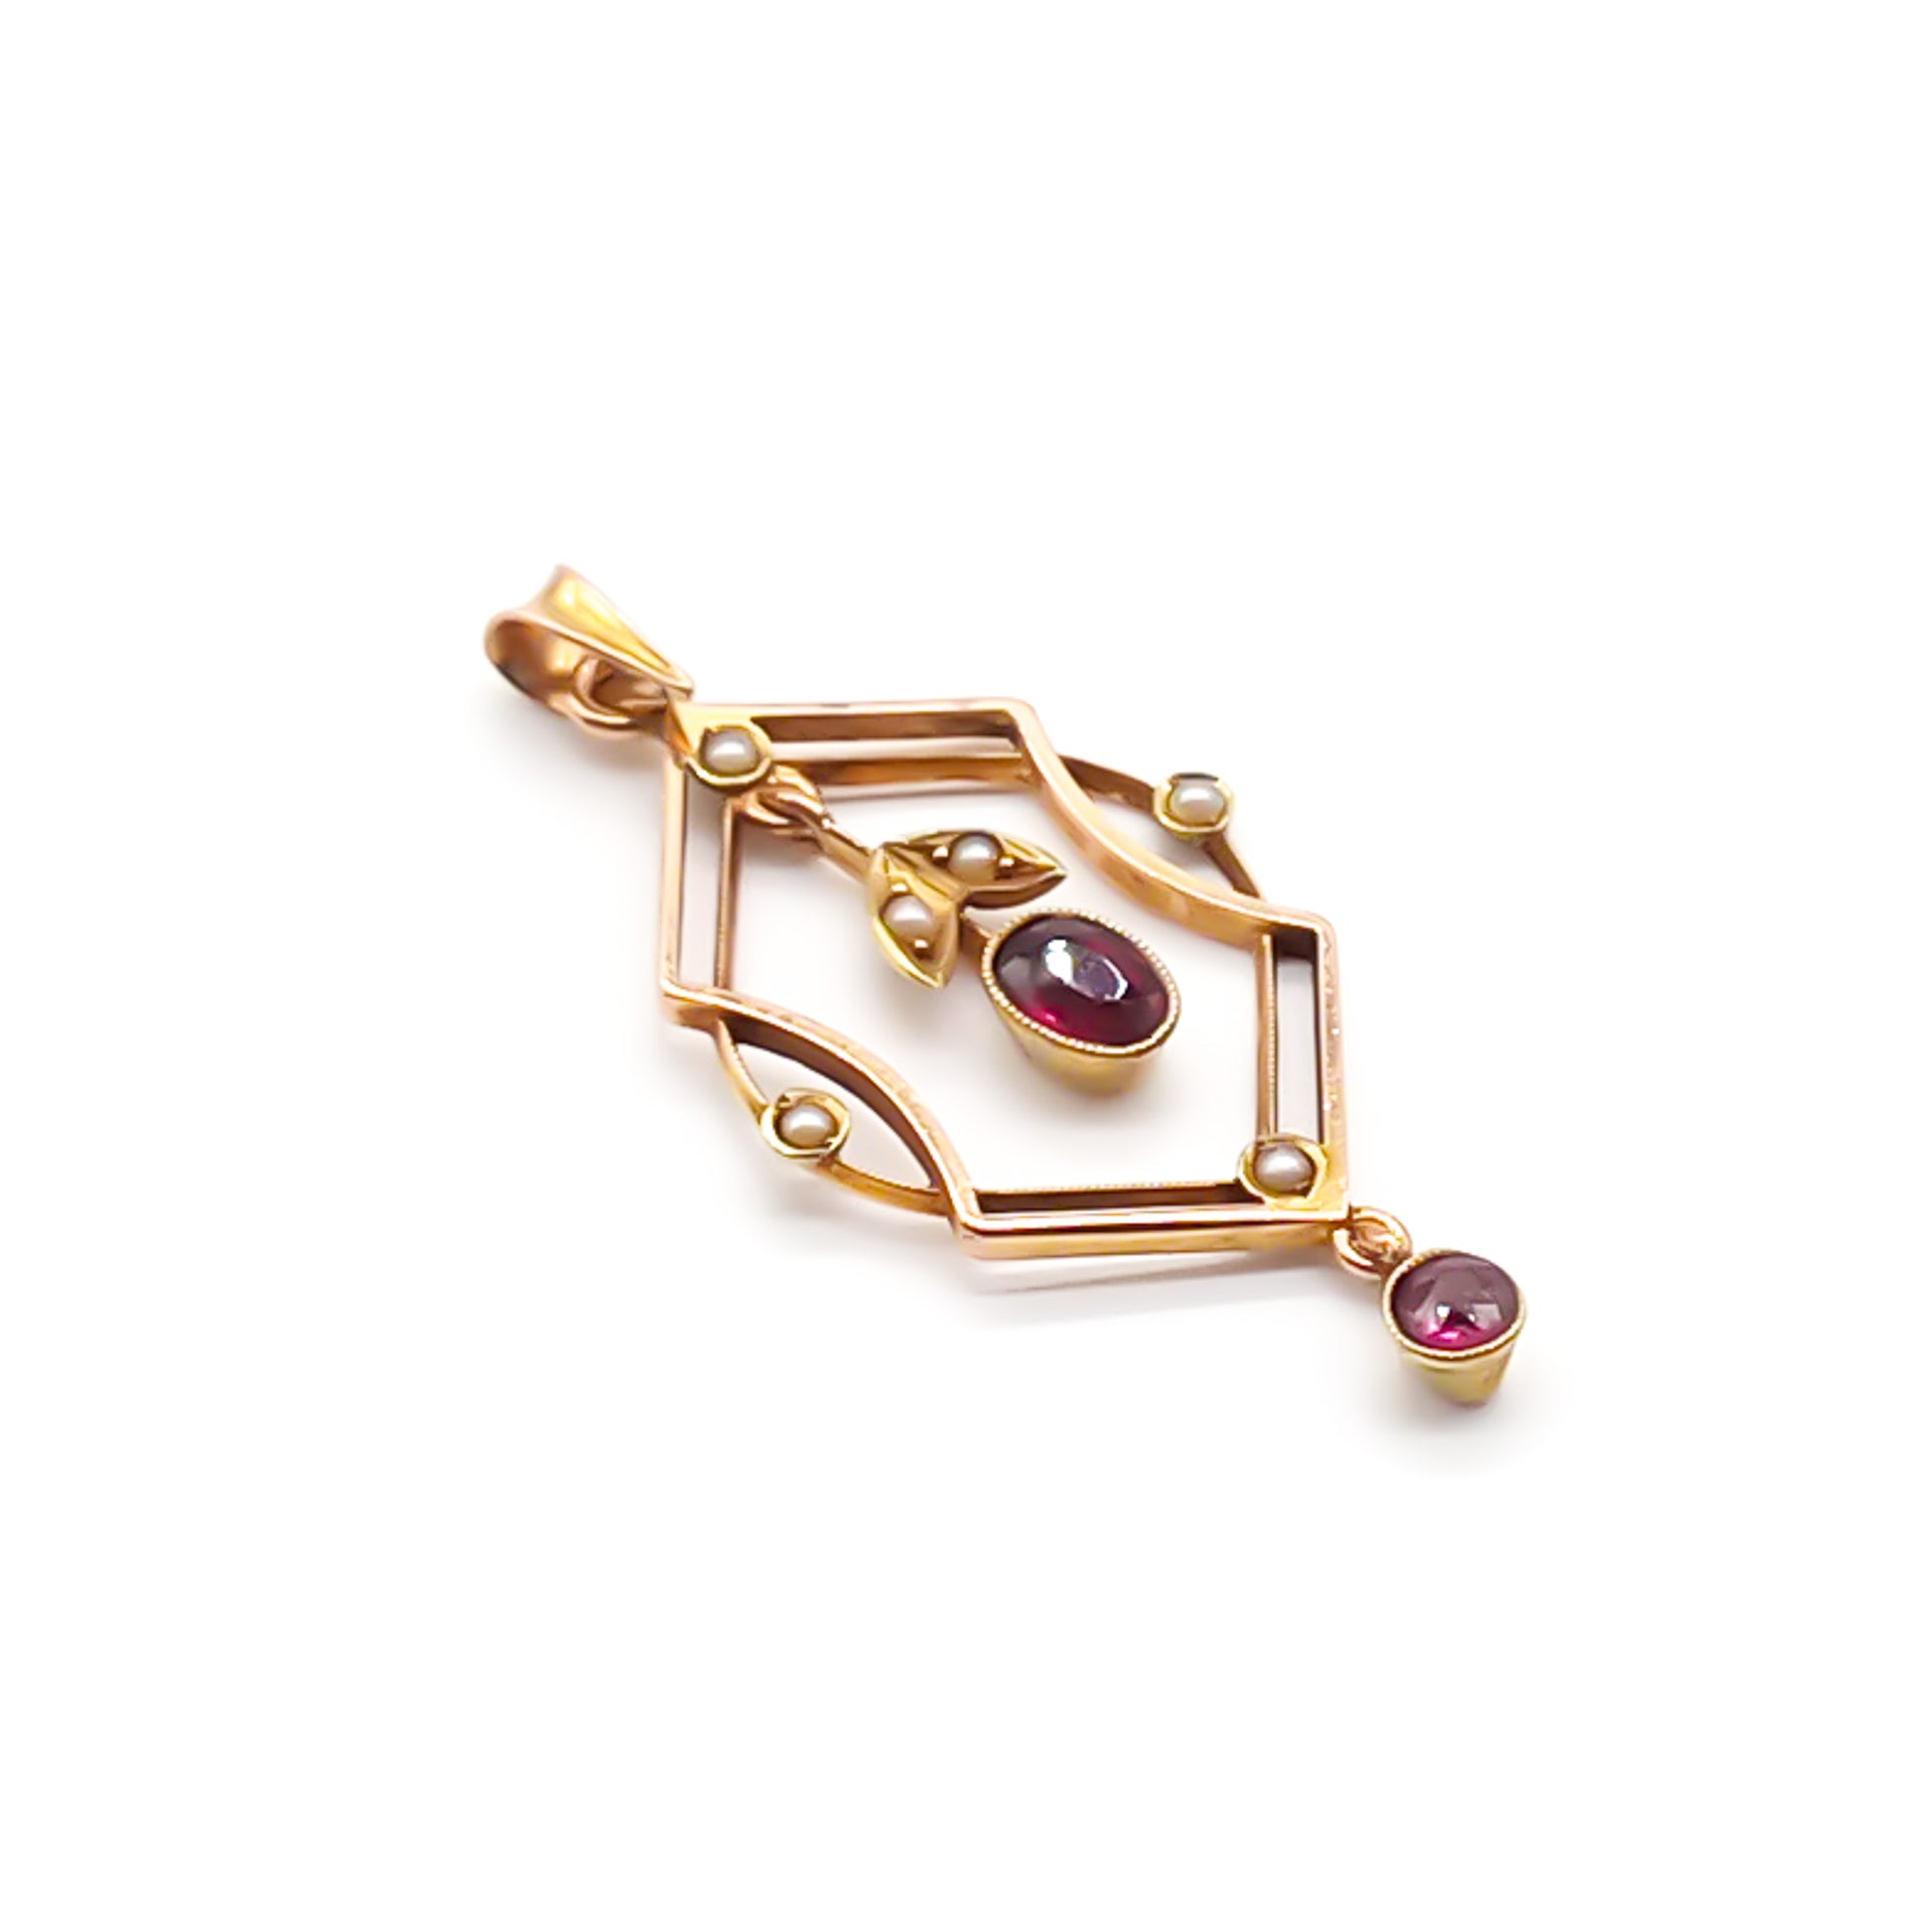 Dainty Edwardian 9ct rose gold pendant set with six seed pearls and two faceted garnet drops.